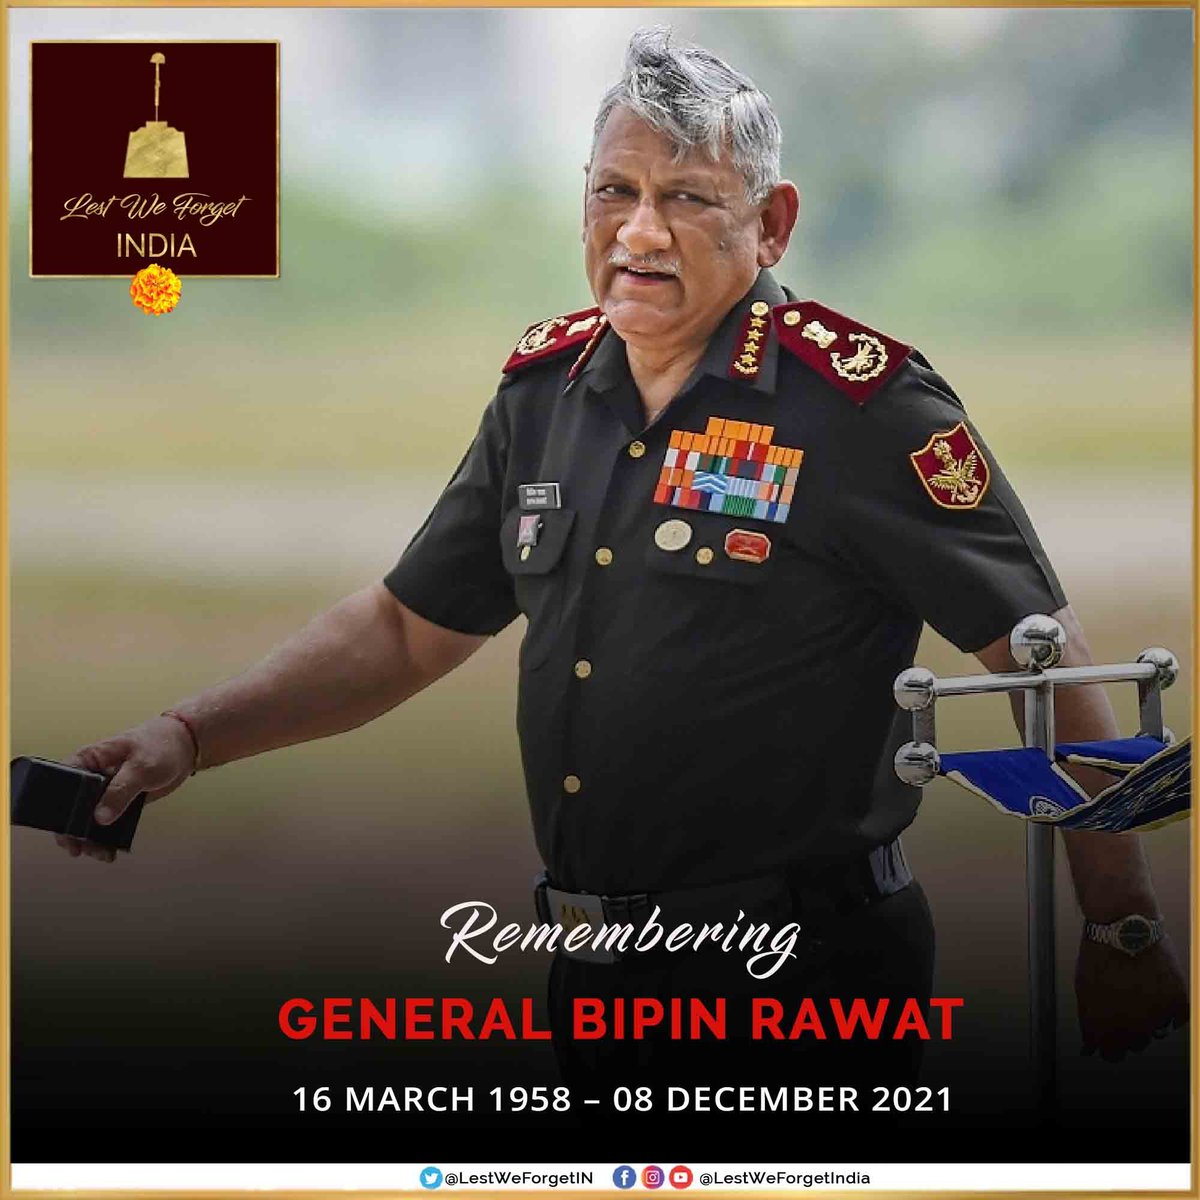 #LestWeForgetIndia🇮🇳 General Bipin Rawat, #PadmaVibhusan (P), PVSM, UYSM, AVSM, YSM, SM, VSM; First Chief of Defence Staff on his 66th birth anniv, born #OnThisDay 16 March 1958 The distinguished #IndianBrave General bid his last, in the line of duty on 08 Dec 2021 at Coonoor🏵️